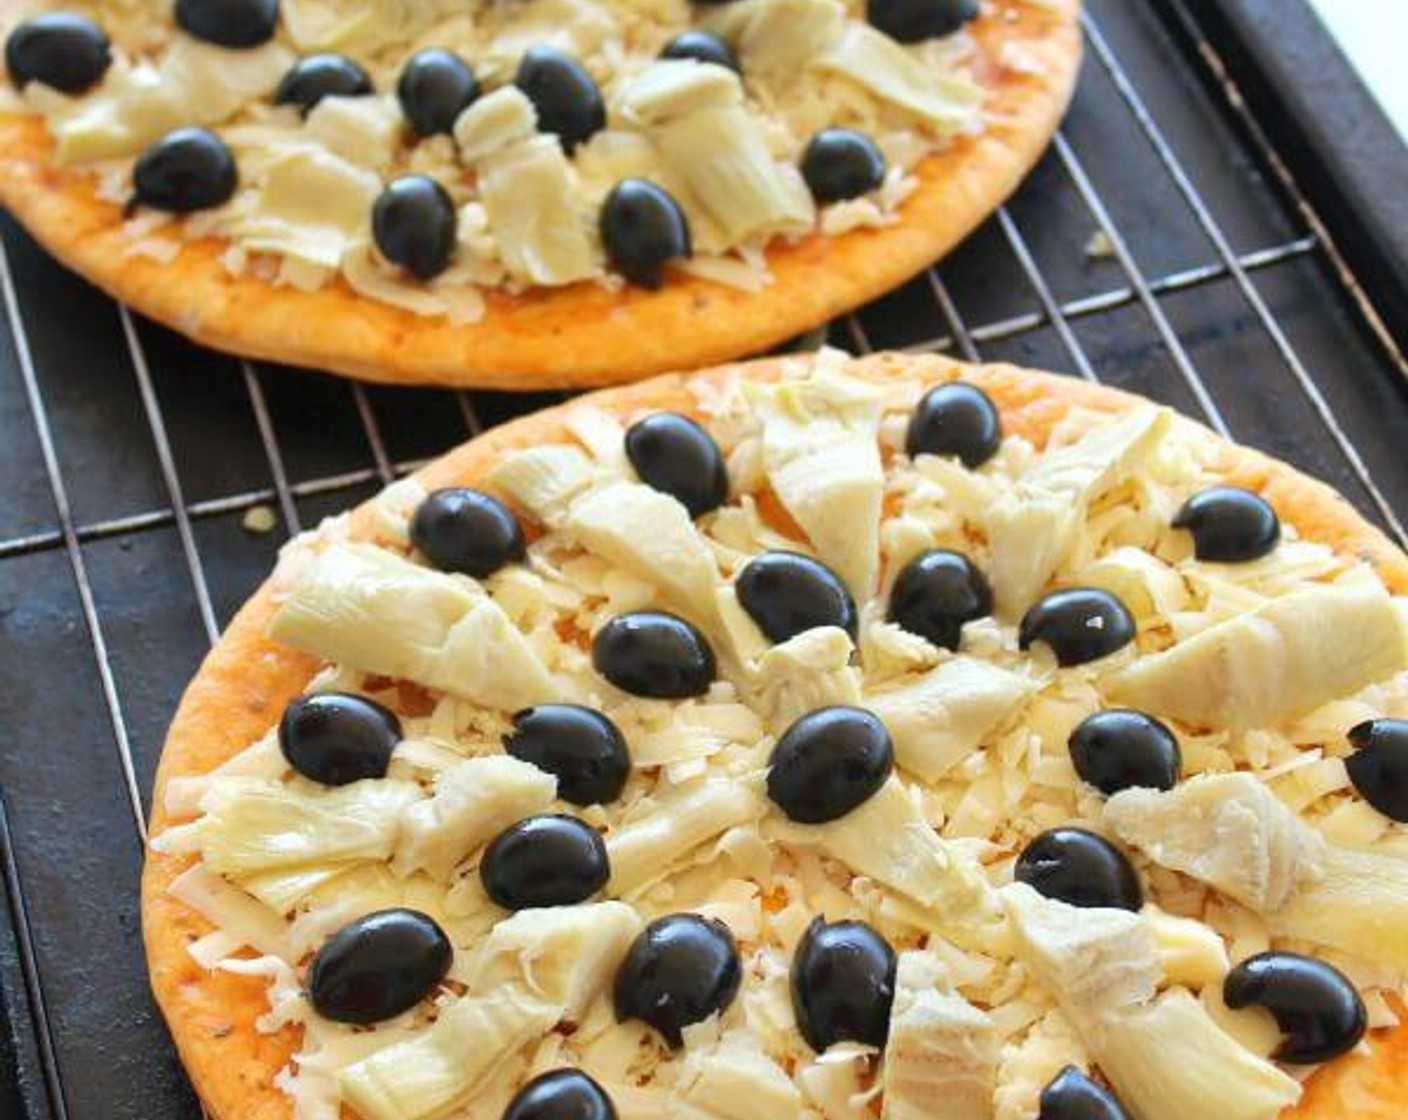 step 2 Place the Prepared Pizza Crusts (2) on a baking sheet with a grill rack. Layer the Mozzarella Cheese (1 cup), then the Artichoke Hearts (1 cup), and Black Olives (1 2/3 cups).